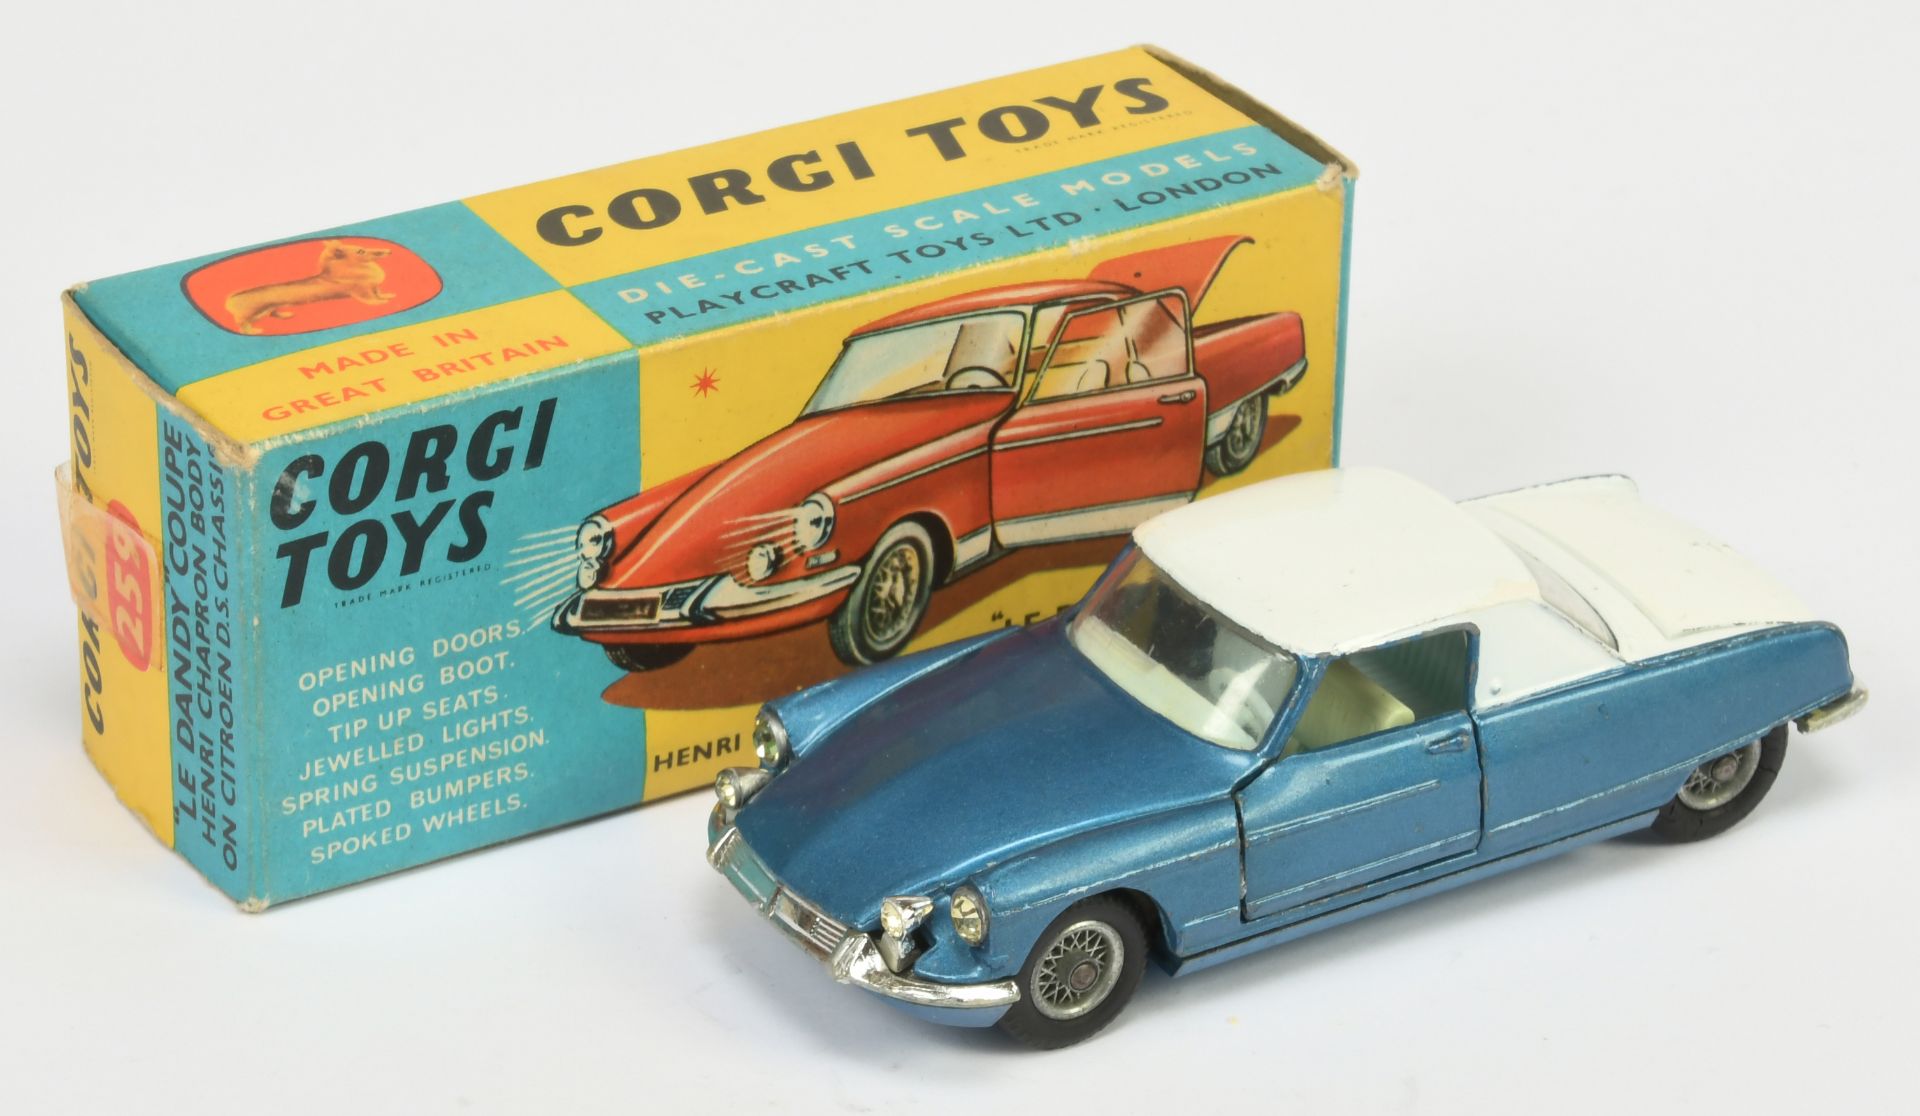 Corgi Toys  259 Le Dandy Coupe - Two-Tone Blue and white, pale blue interior, chrome trim and wir...